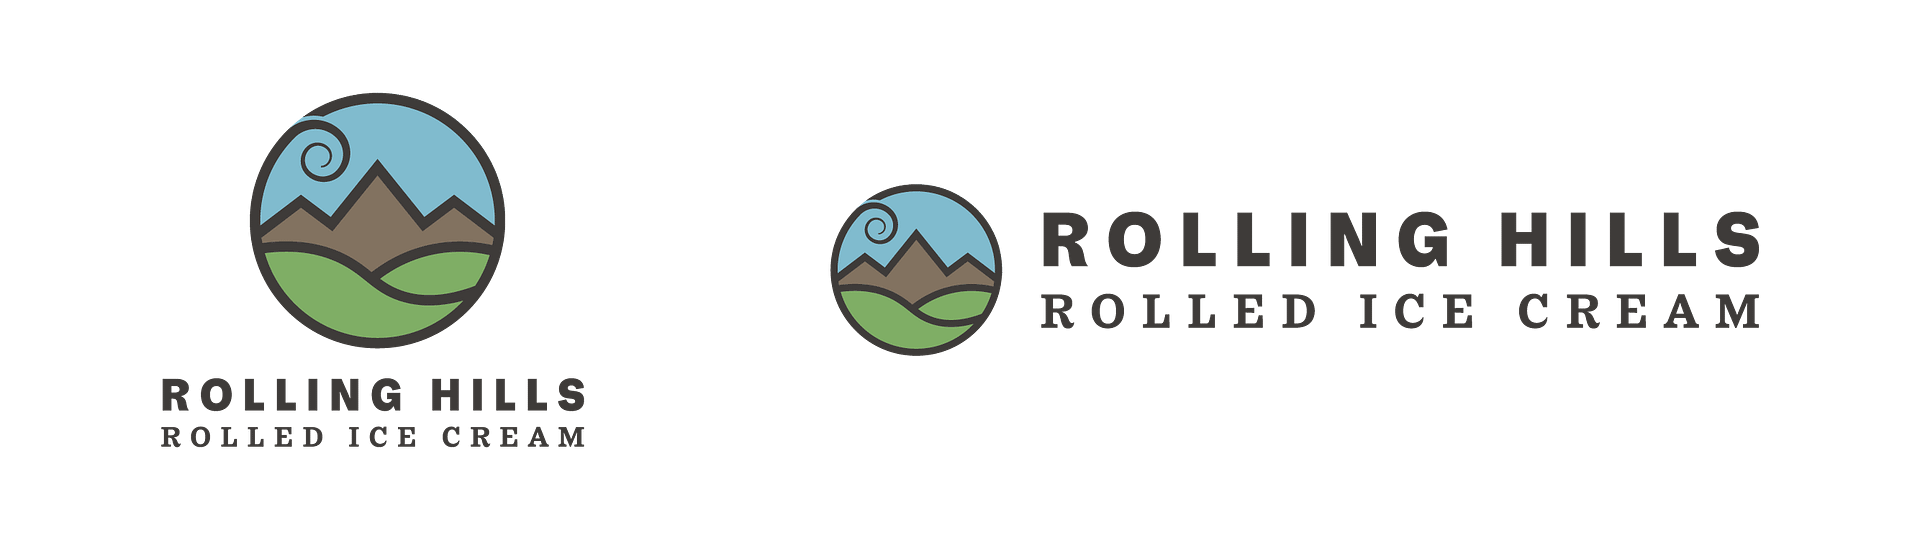 Rolling Hills Rolled Ice Cream business logo and landscape logo